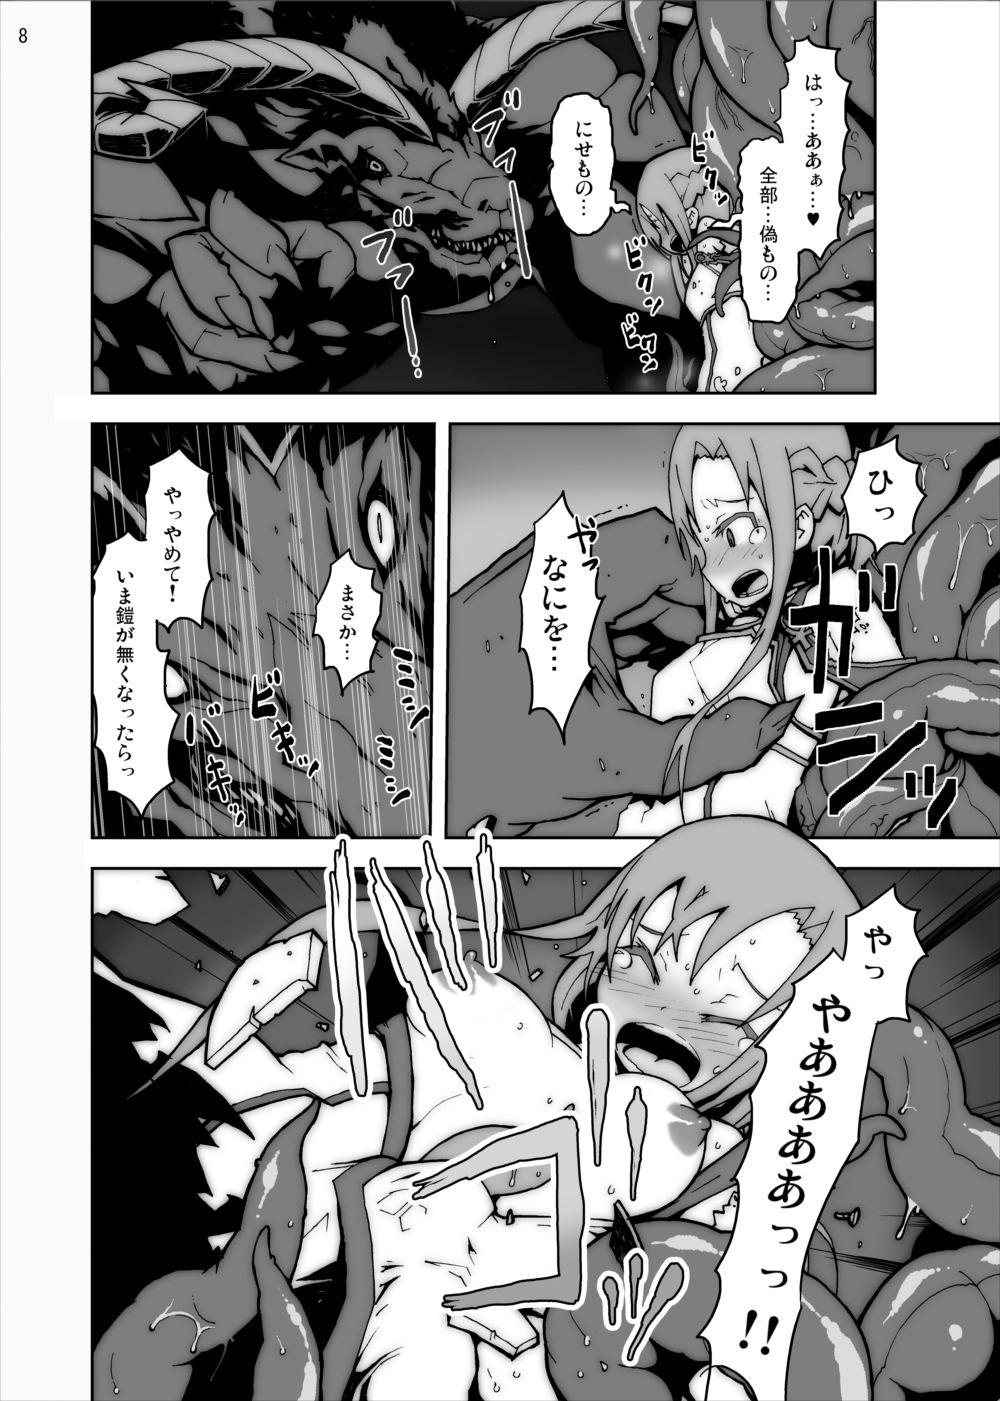 Ethnic Asuna in Tentacle Party Rape Online - Sword art online Family Roleplay - Page 7